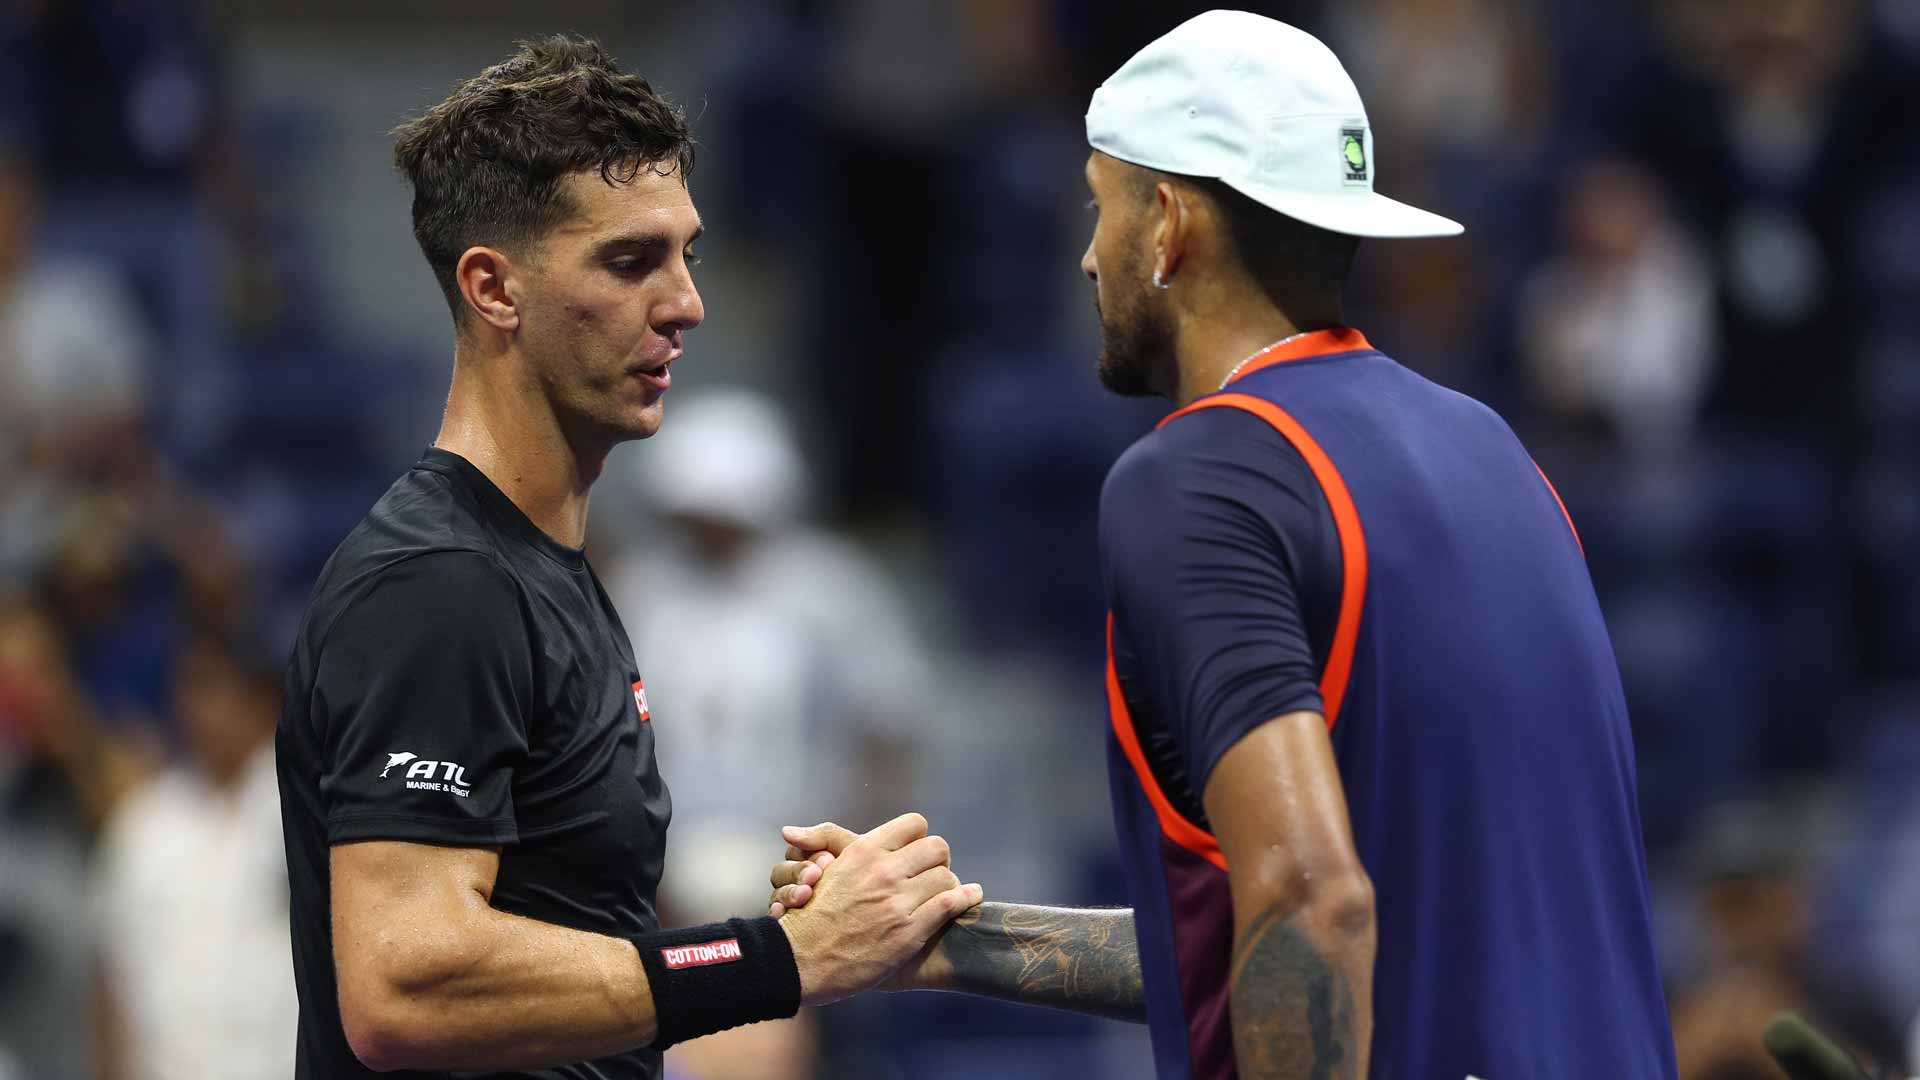 Close friends Kokkinakis and Kyrgios encountered each other in the US Open opening round.